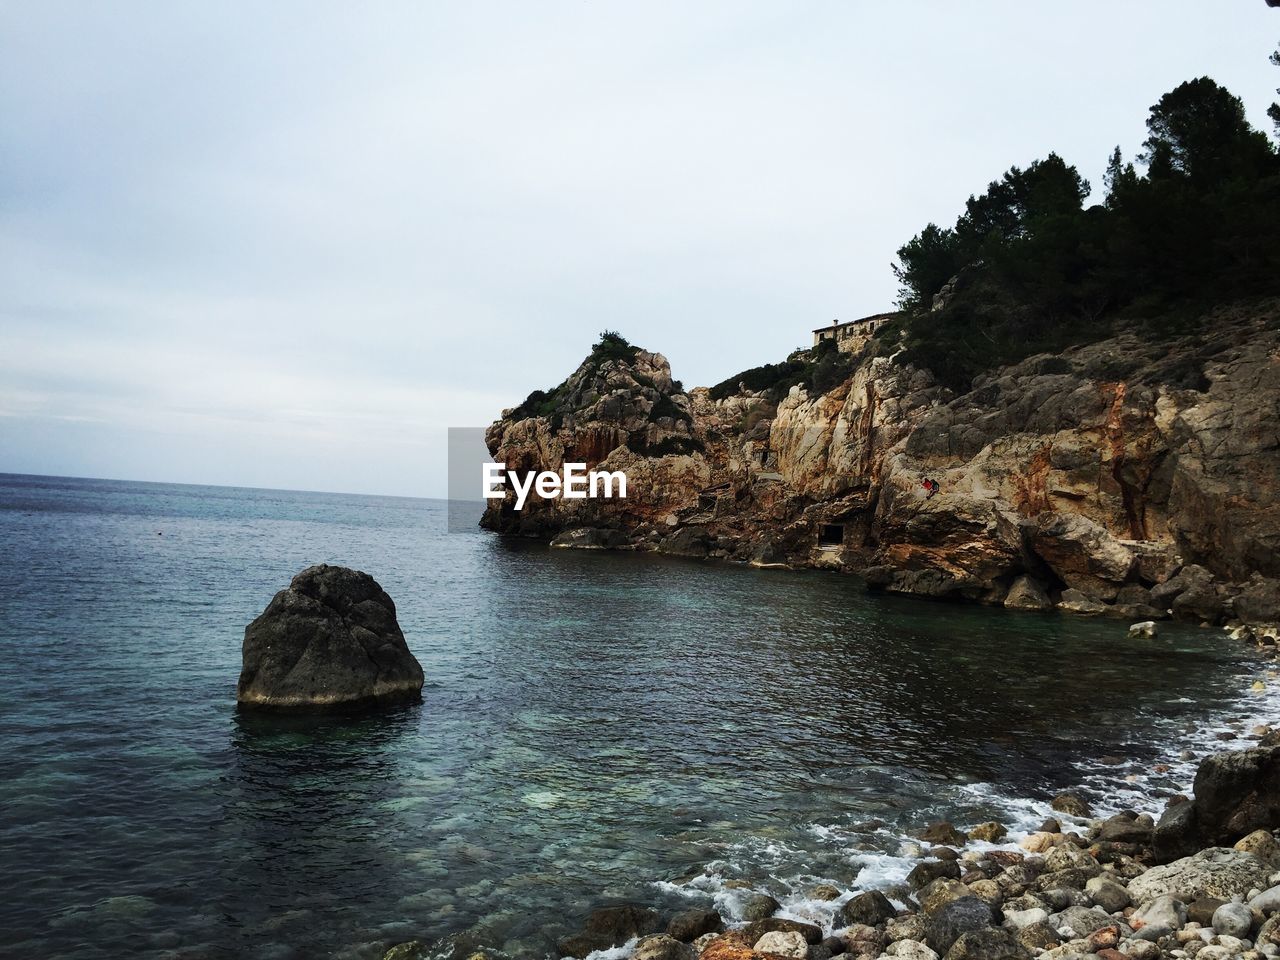 SCENIC VIEW OF SEA AND ROCK FORMATION